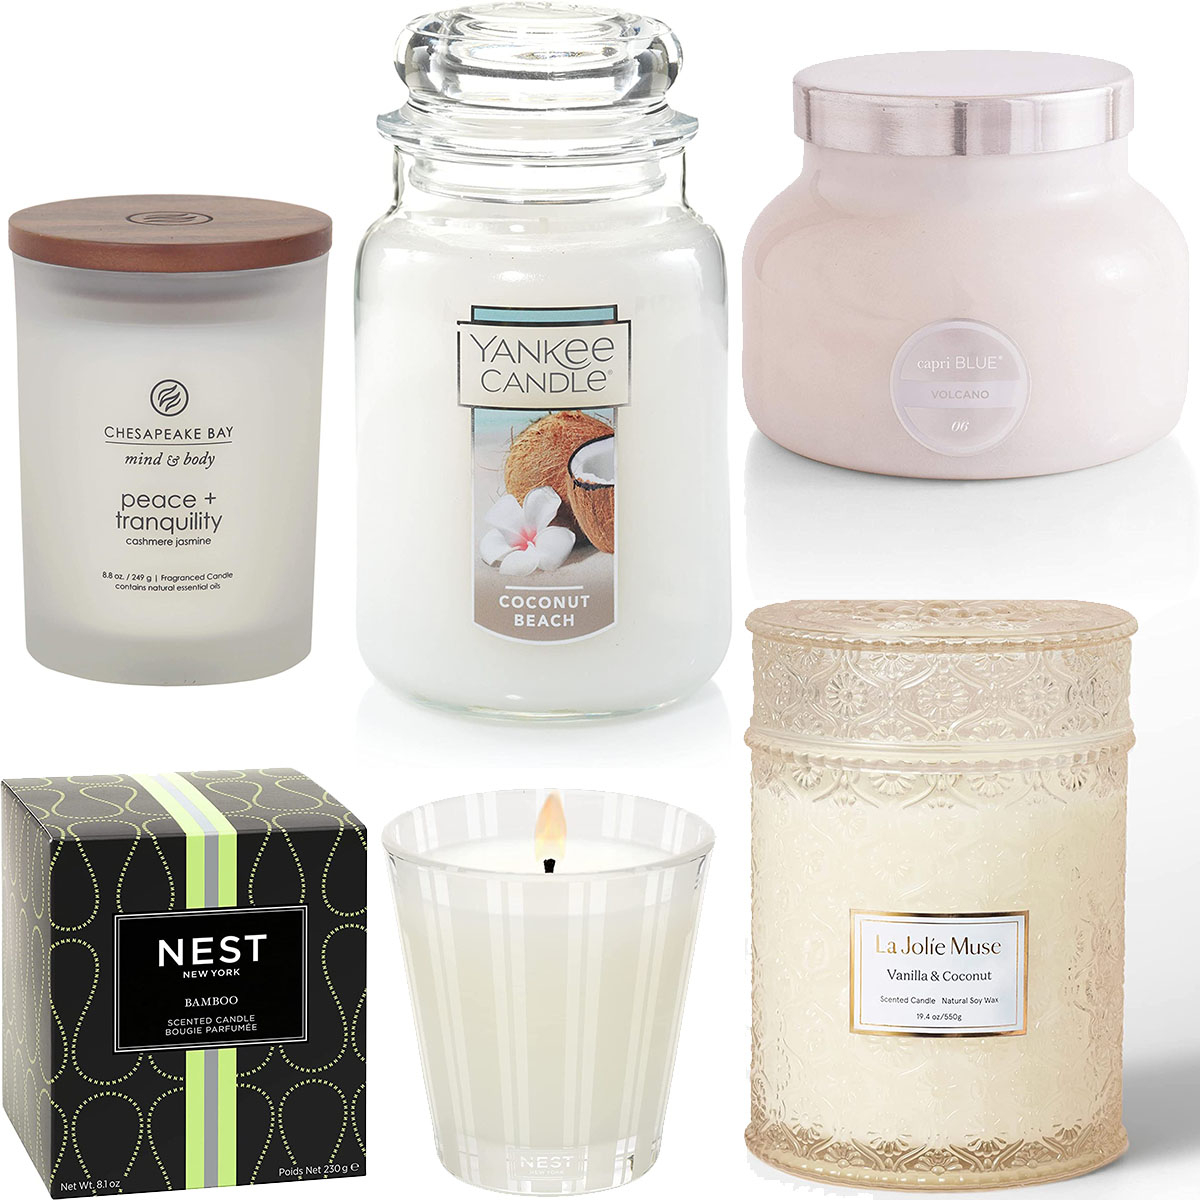 The 12 Most-Loved Amazon Candles With Thousands of 5-Star Reviews